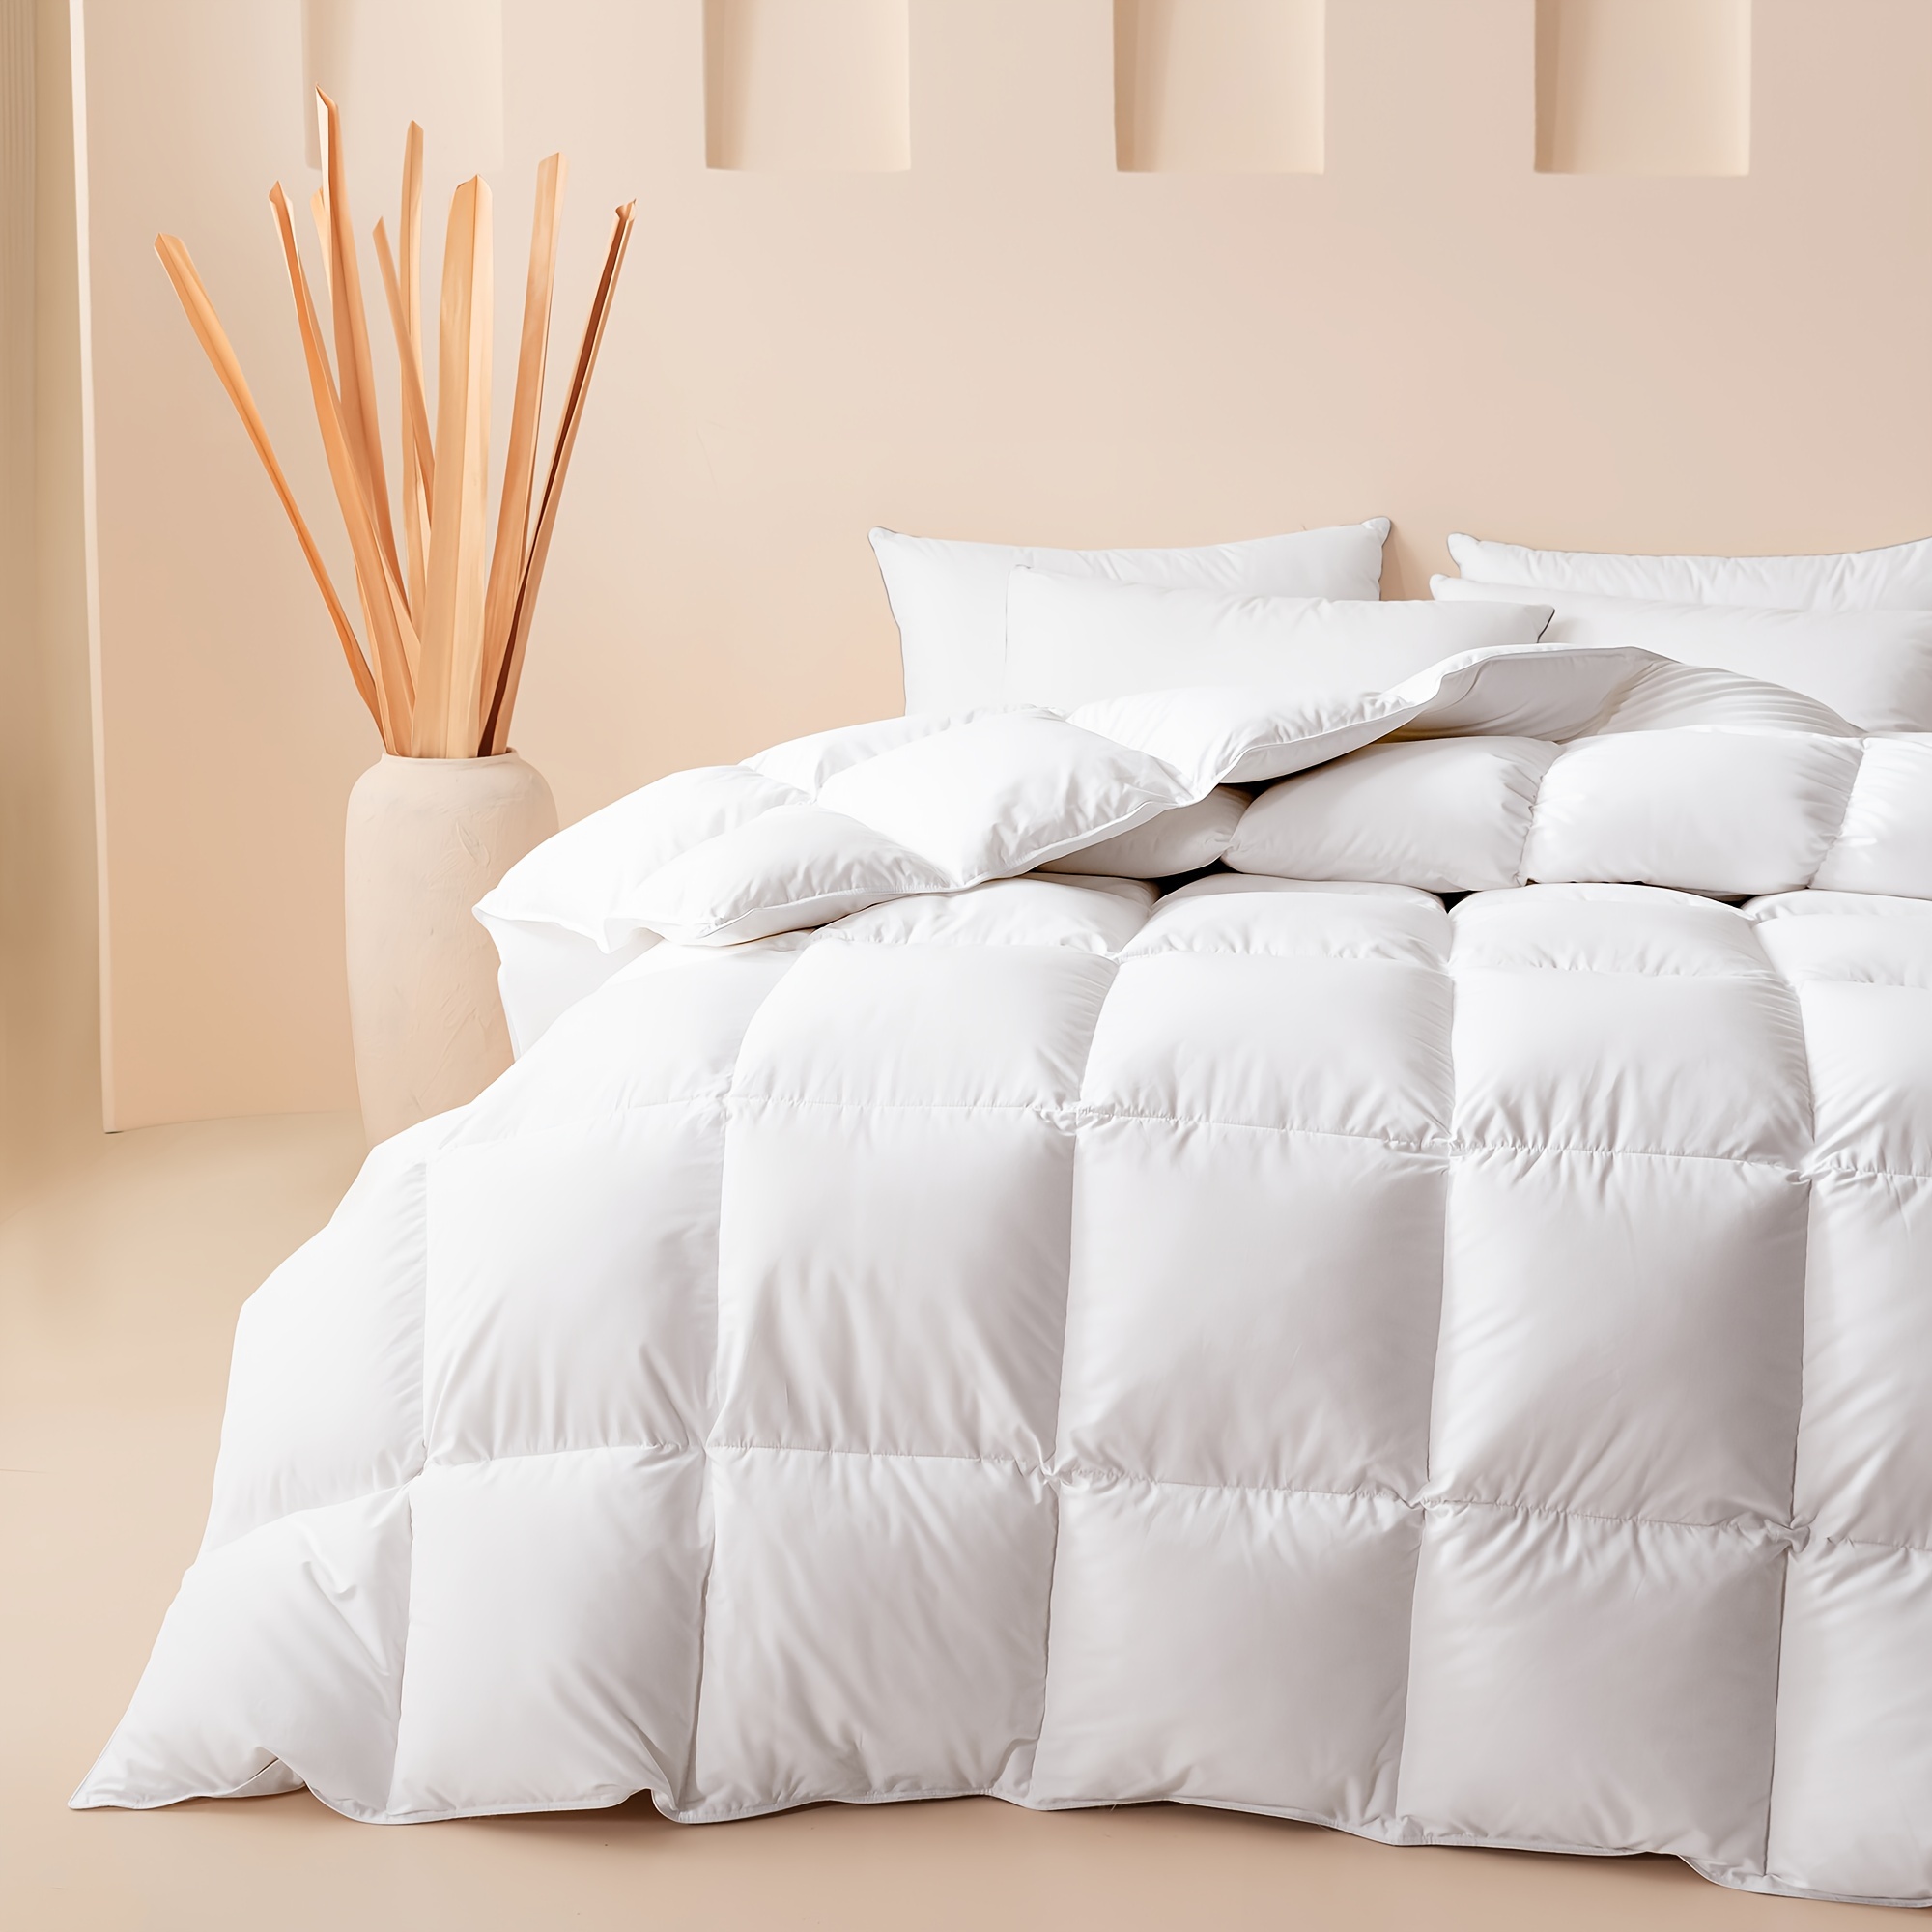 

Cosybay Queen Goose Feather Down Comforter, Ultra Fluffy Down Duvet Insert Queen Size, All Season White 100% Cotton Cover Luxury Hotel Bed Comforter With Corner Tabs, 90"x90